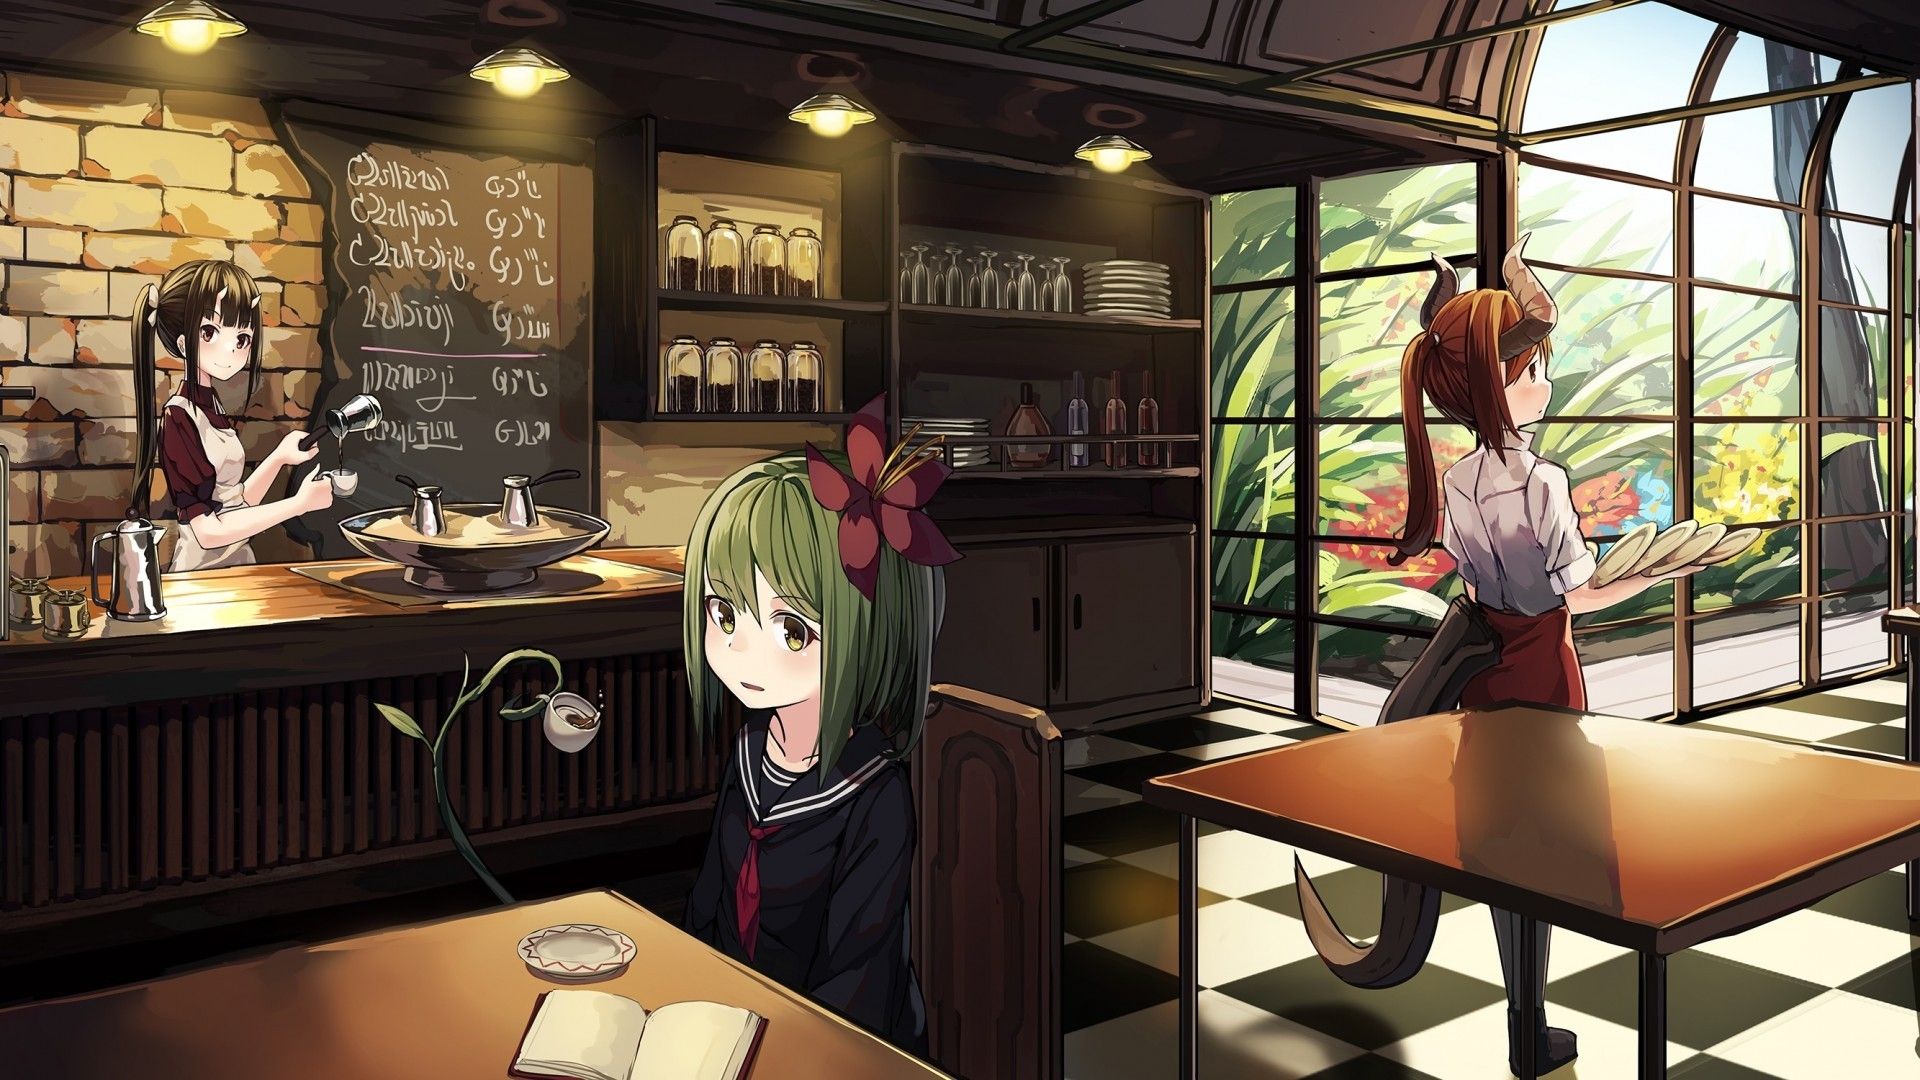 Download 1920x1080 Anime Cafe, Slice Of Life, Girls, Ponytail, Horns Wallpaper for Widescreen